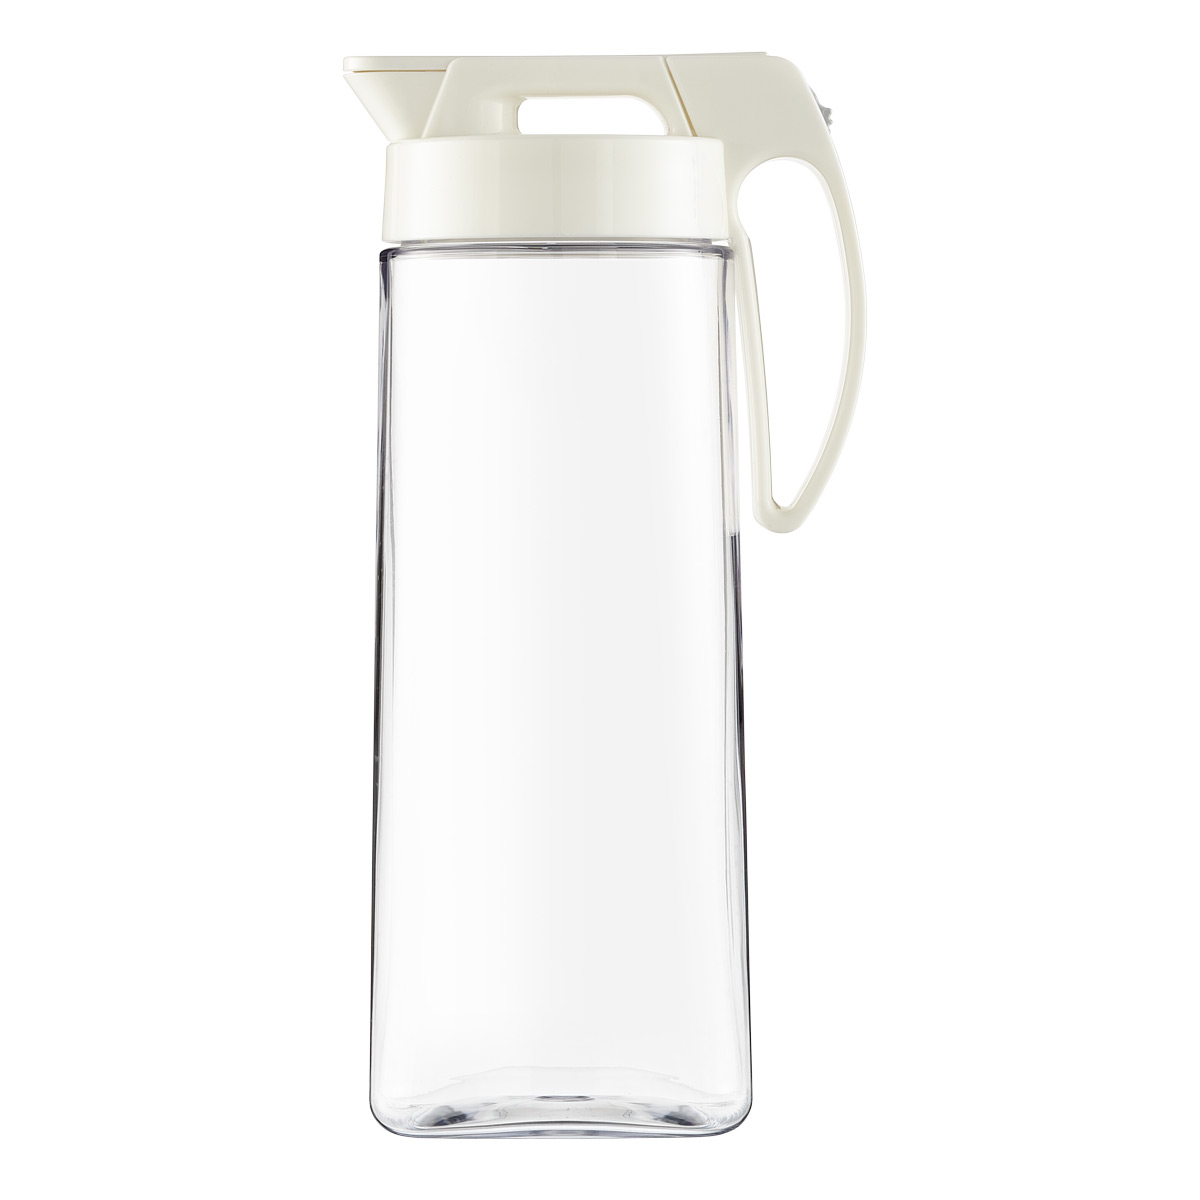 https://www.containerstore.com/catalogimages/424582/10084639_2.2_qt_Water_Pitcher_White.jpg